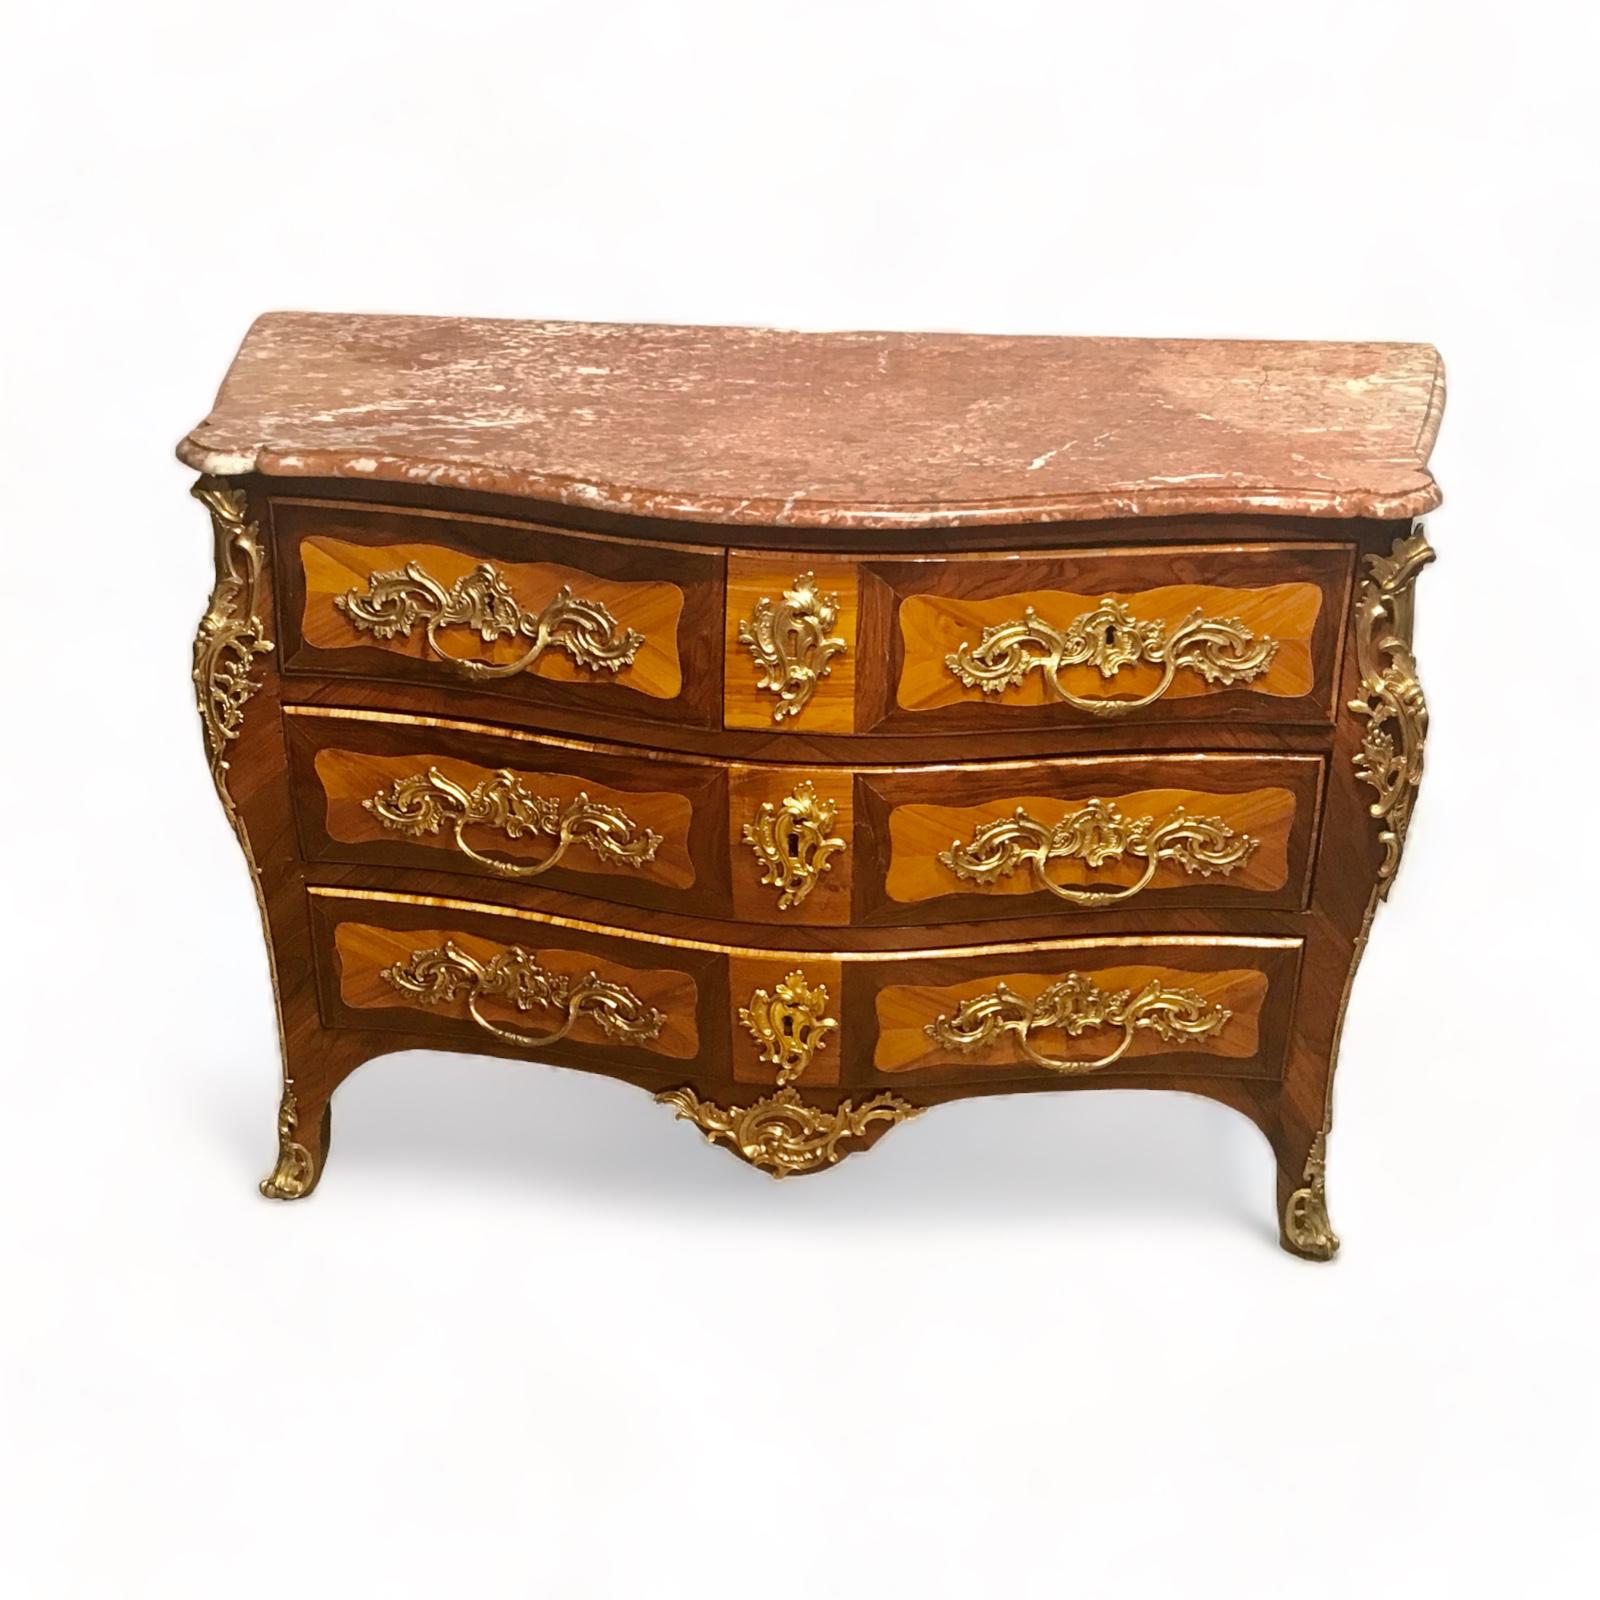 Indulge in the timeless allure of this exquisite 18th century  French Louis XV Bombe Commode, a true embodiment of opulence and sophistication. Elevated on gracefully curved legs adorned with scrolled caps, this fine piece showcases a bombé front